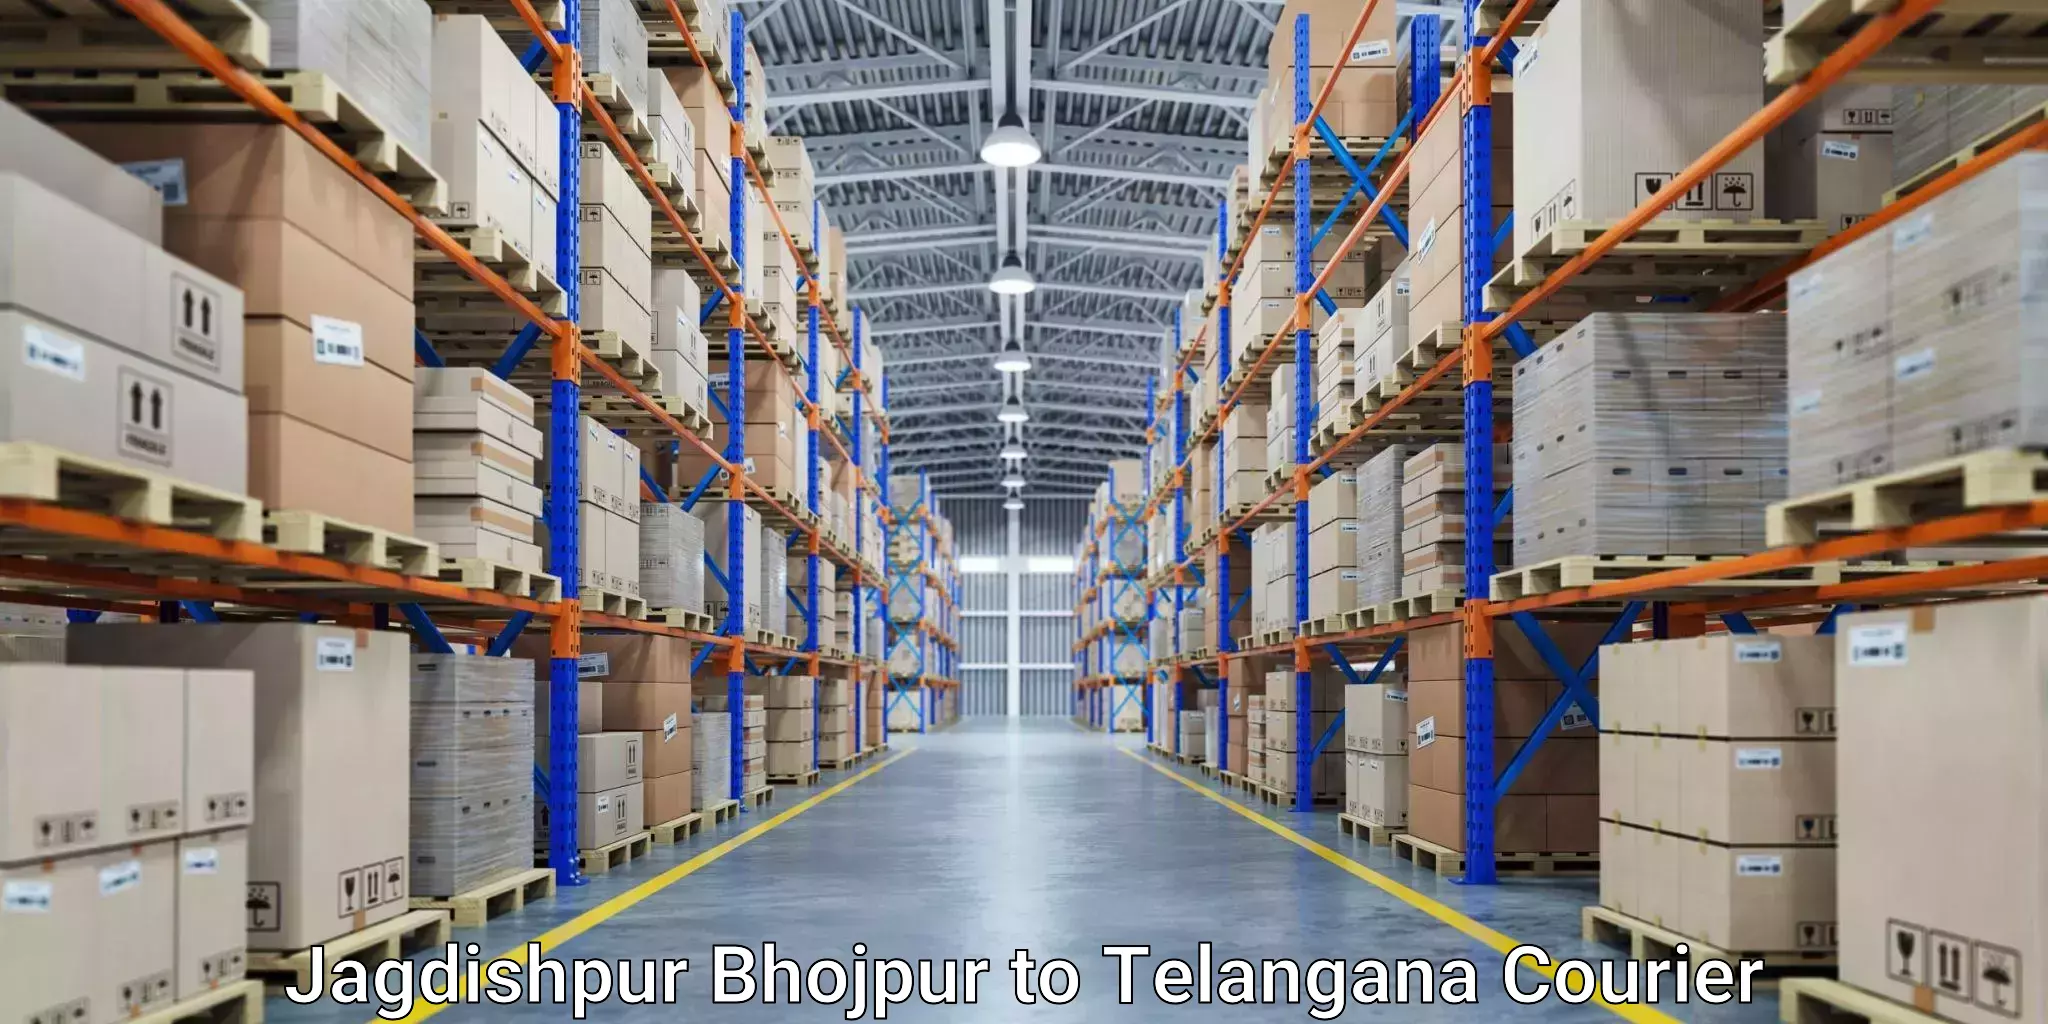 State-of-the-art courier technology Jagdishpur Bhojpur to Nalgonda